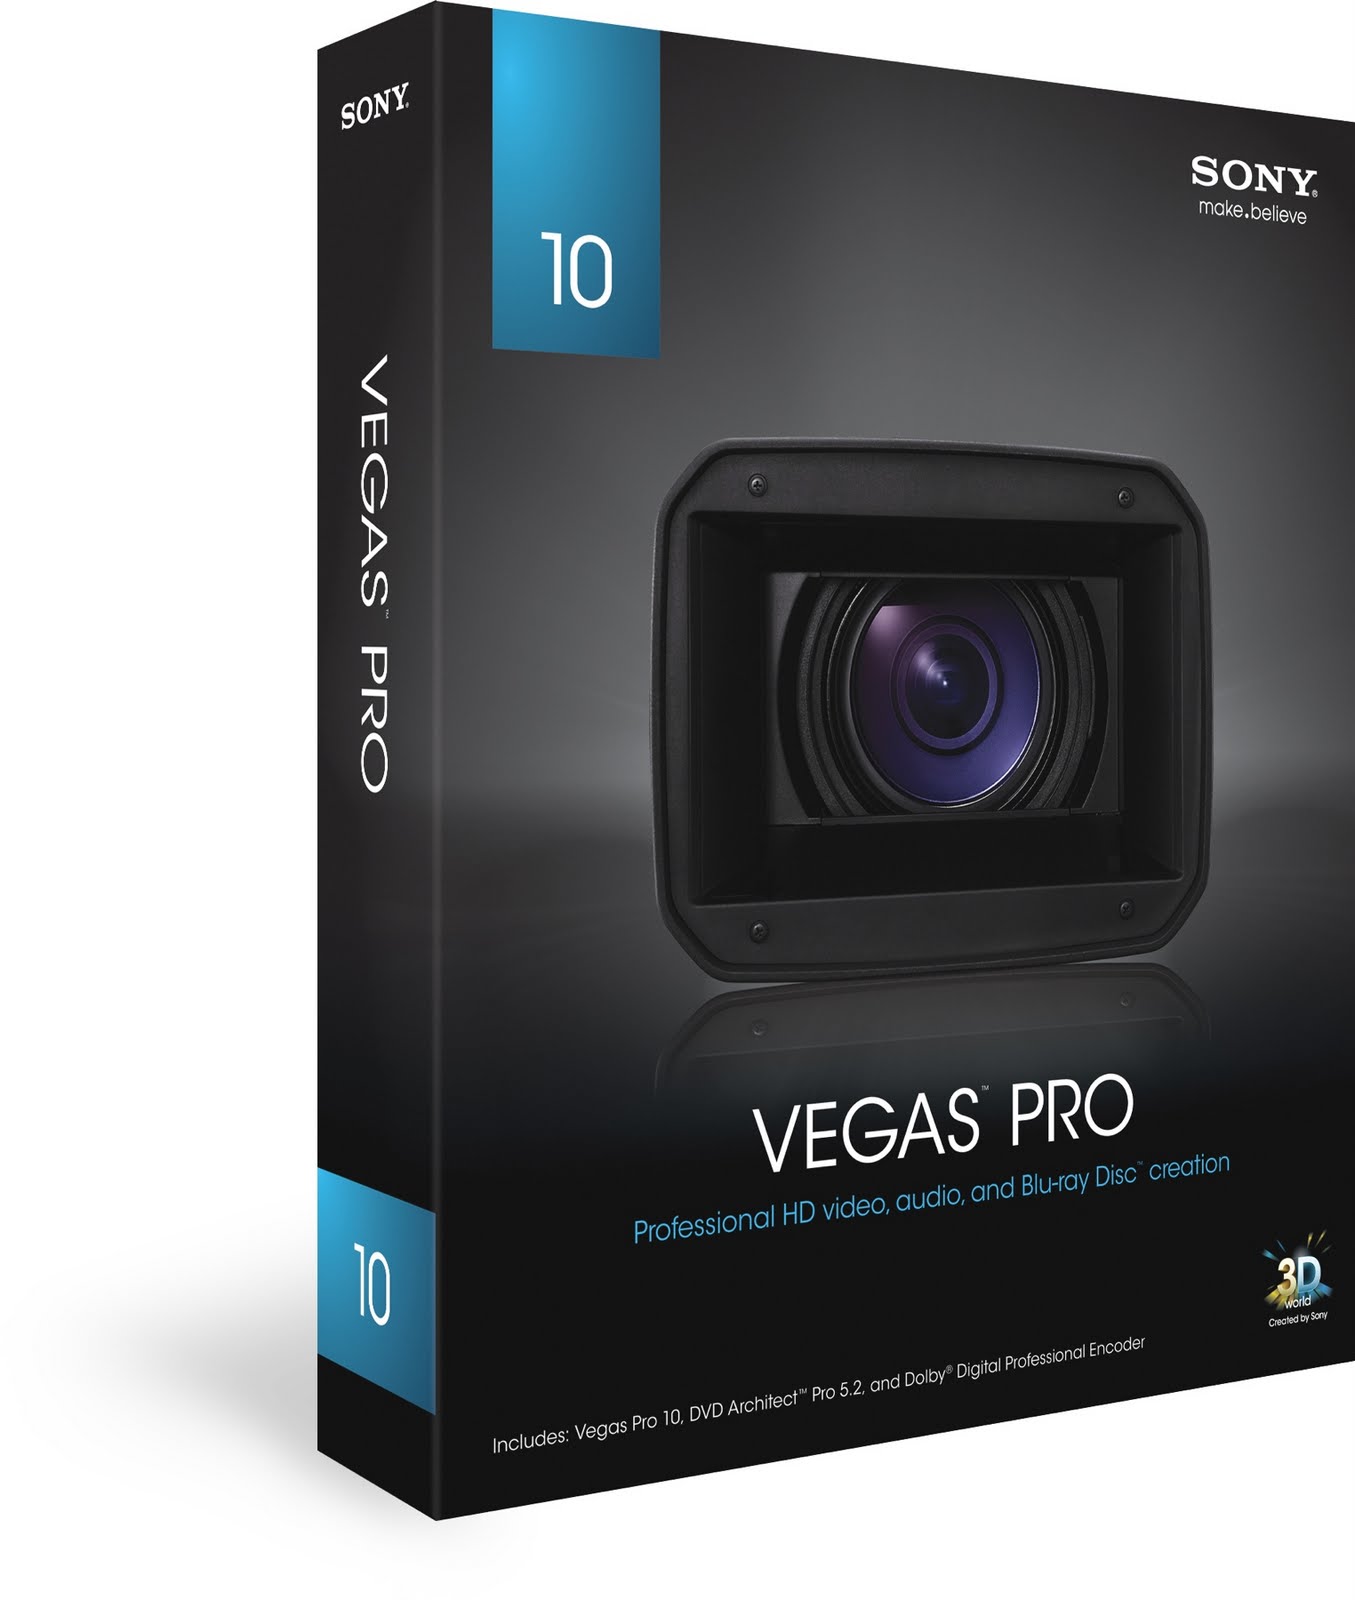 Sony vegas pro 10 crack only free download